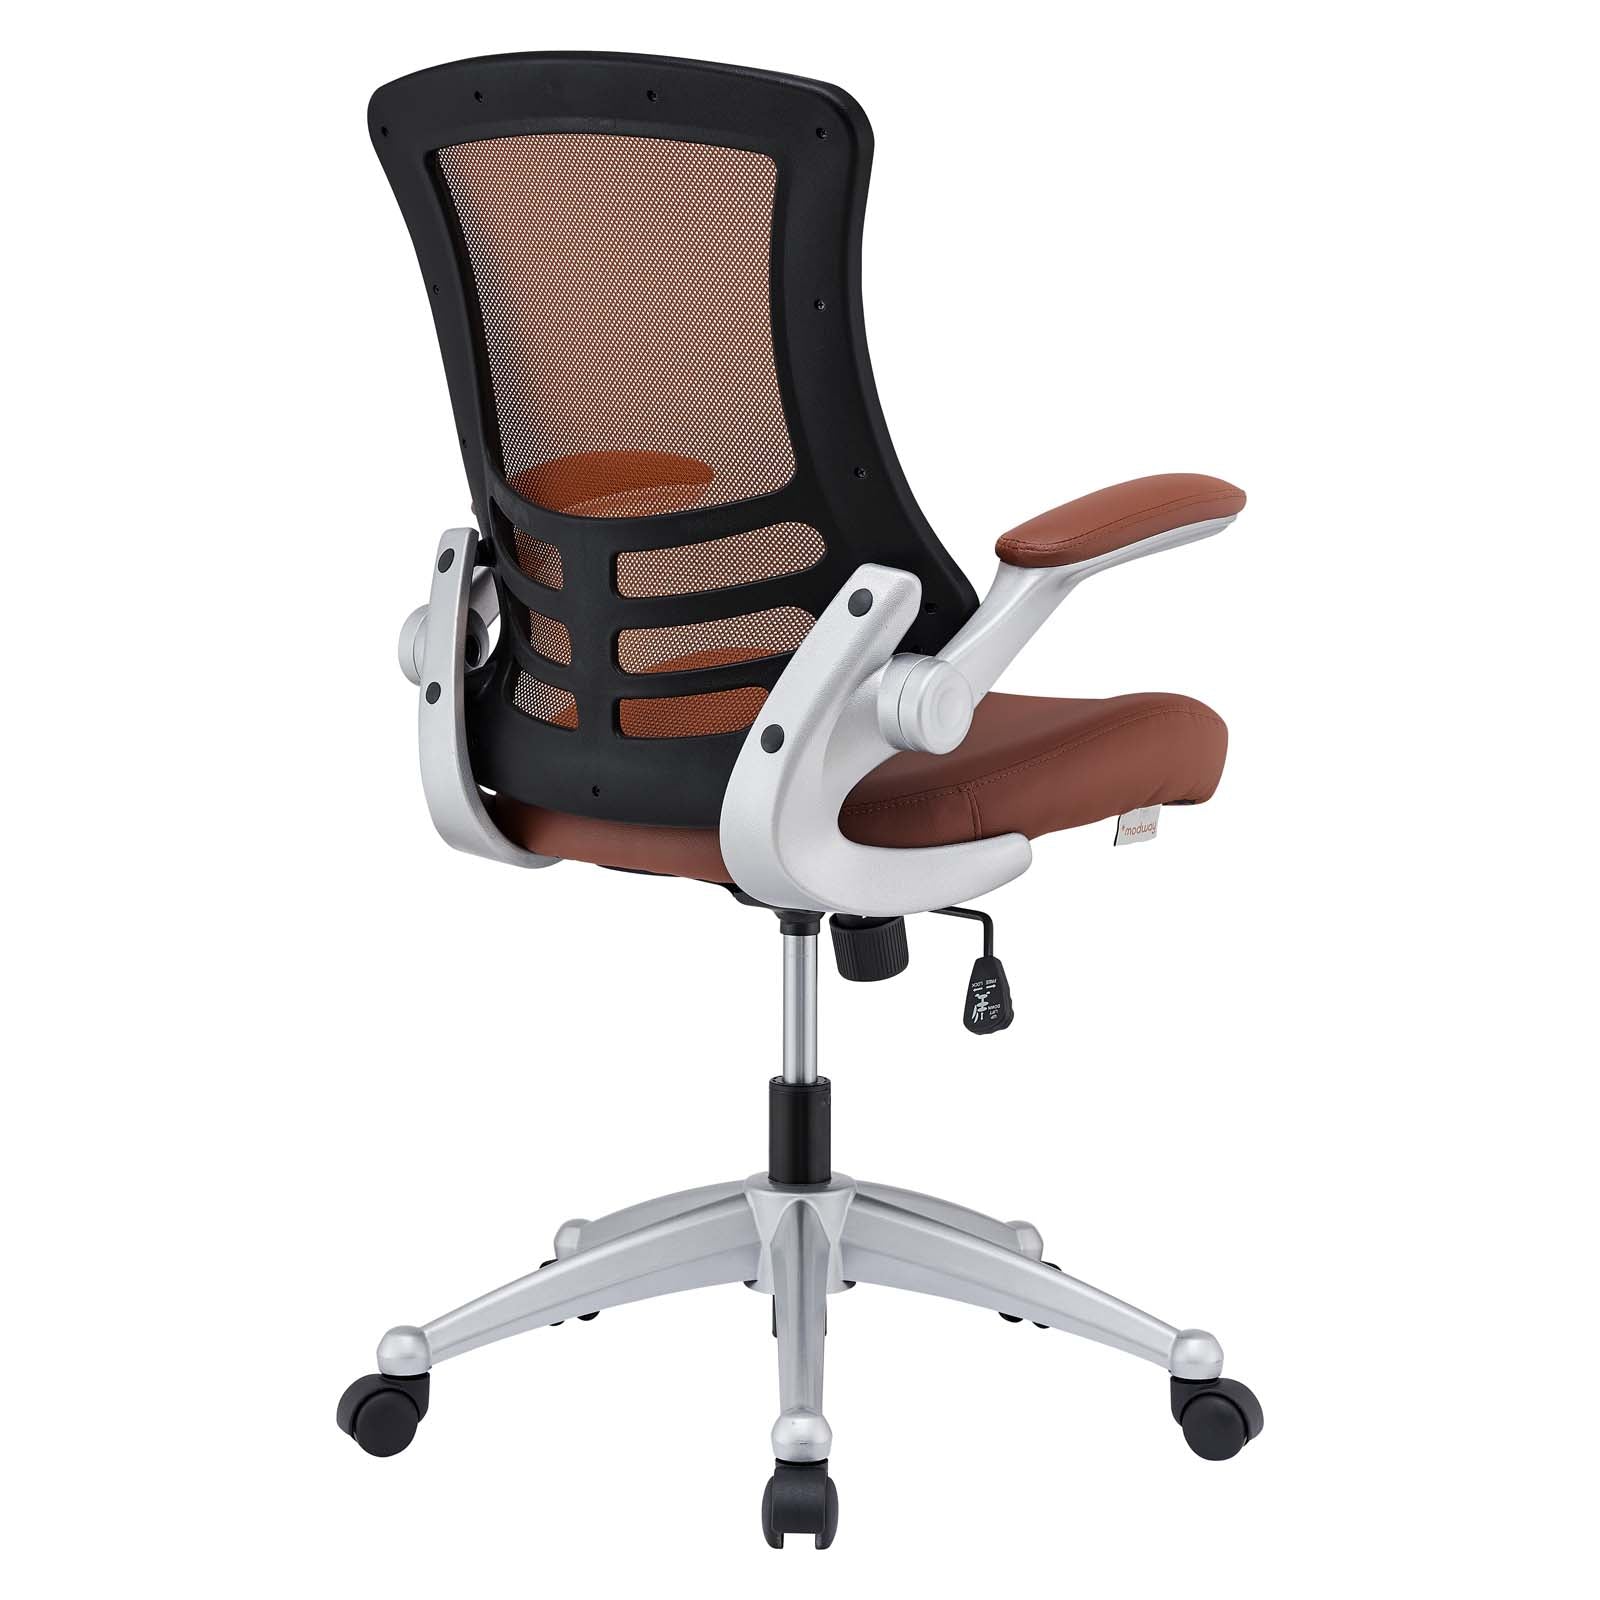 Modway Task Chairs - Attainment Office Chair Tan